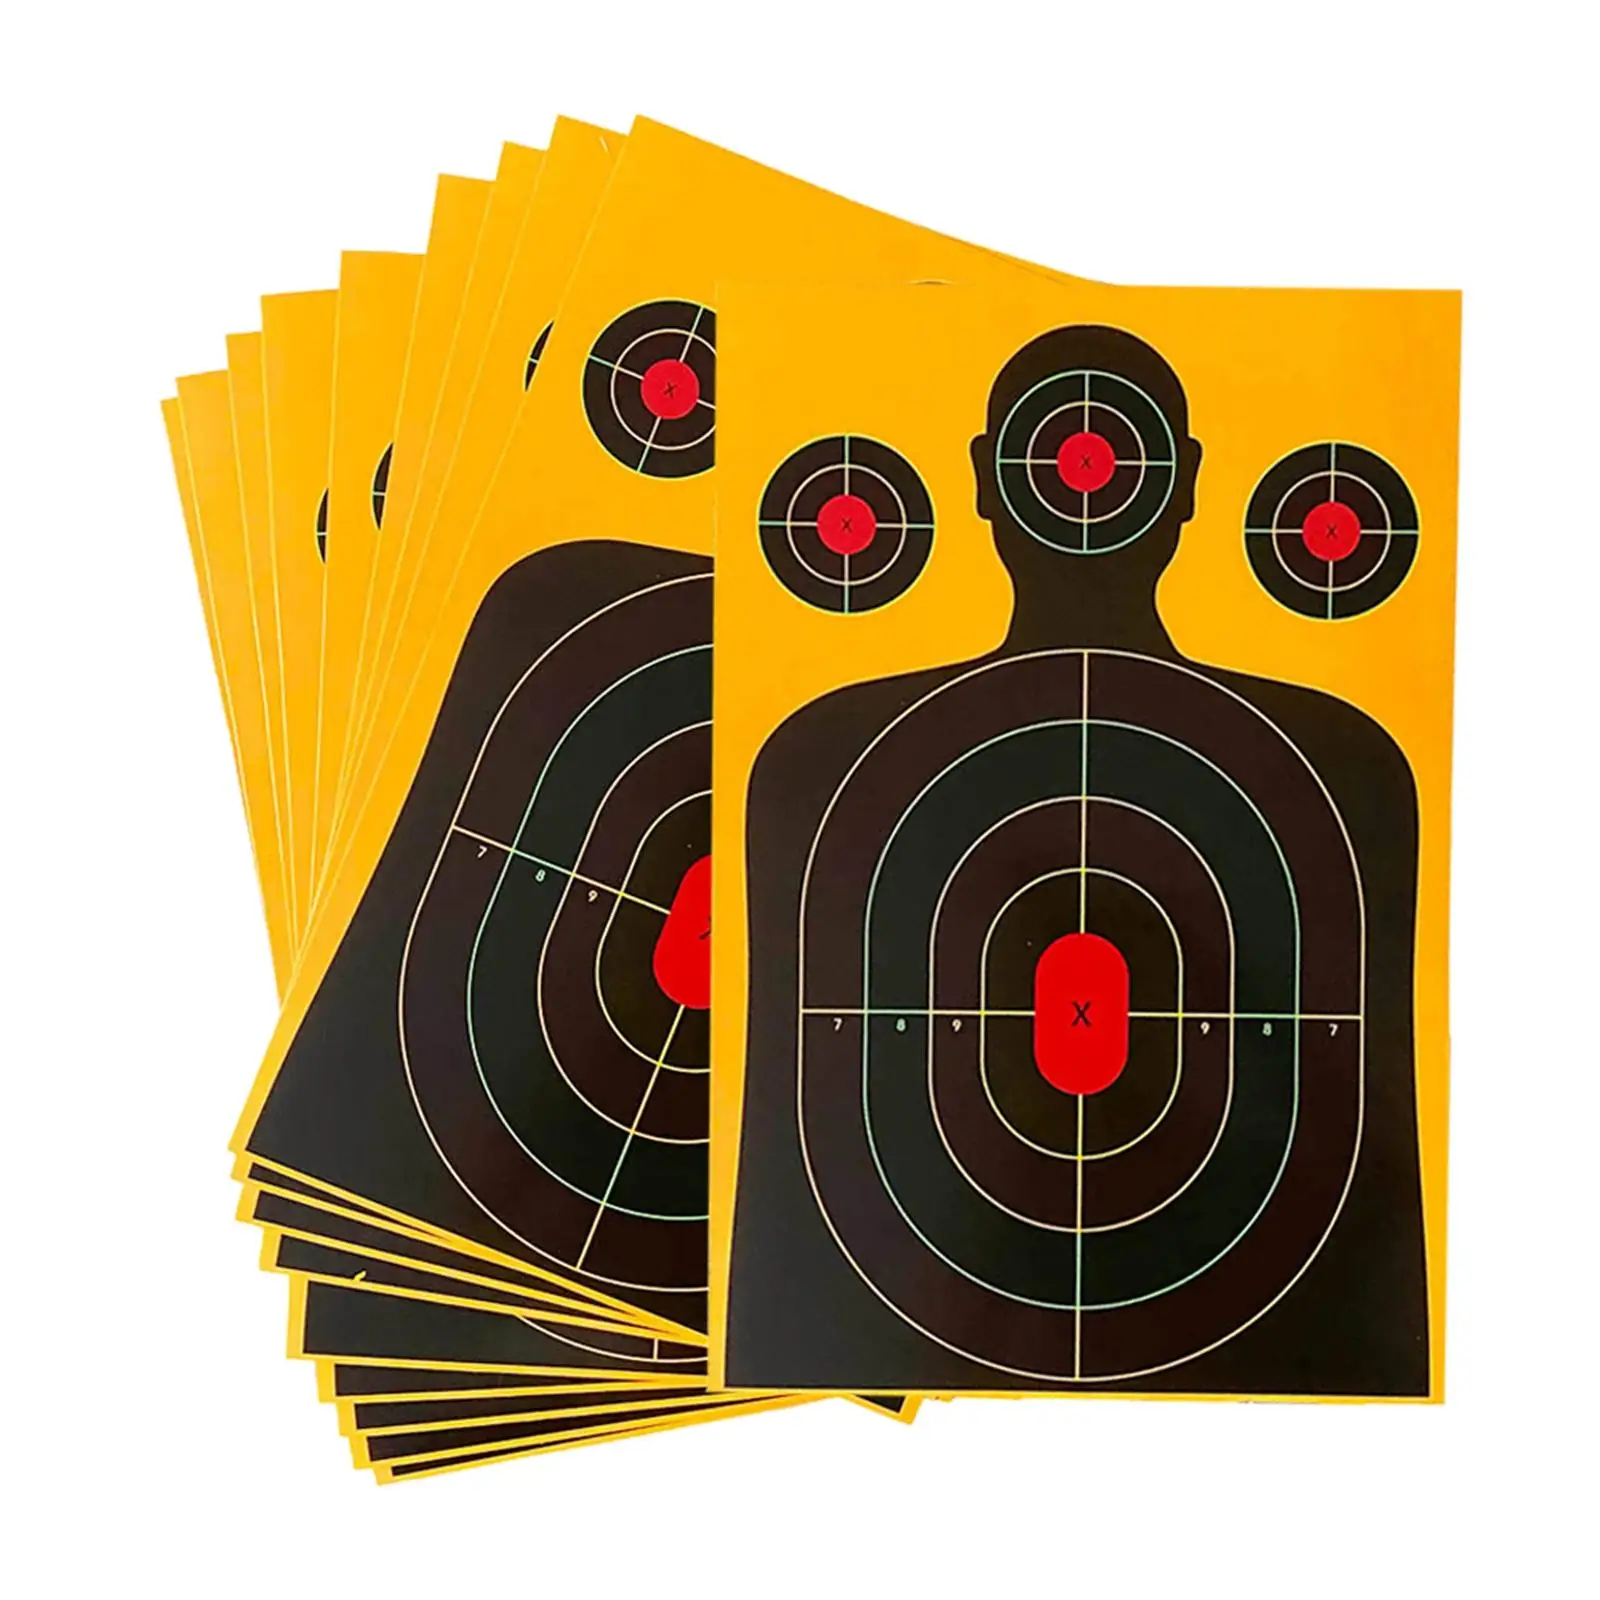 10x Silhouette Target Hunting Professional Outdoor Activities Sports Target